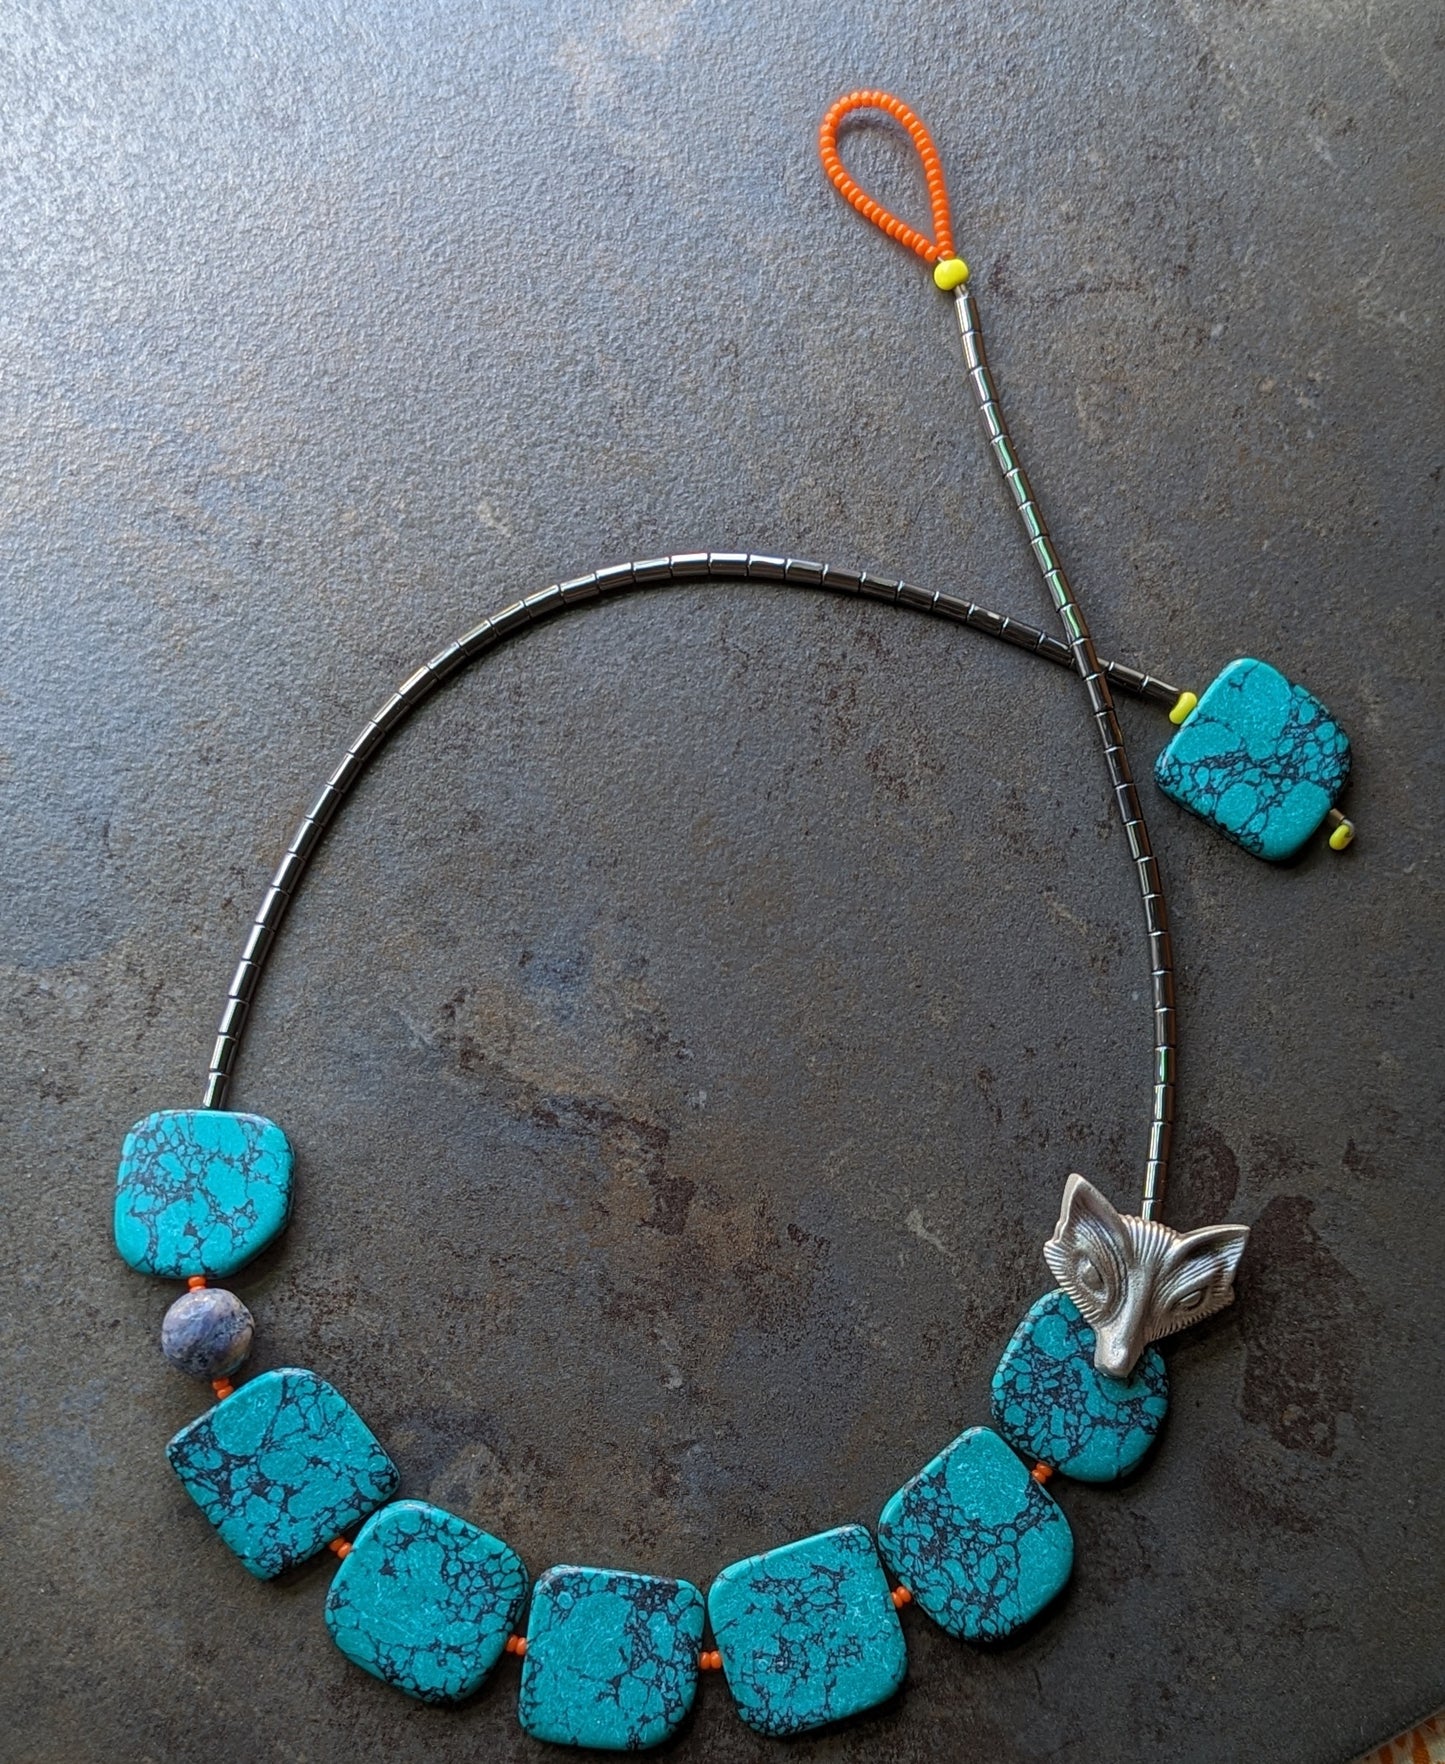 Beaded Necklace with Fox Focal